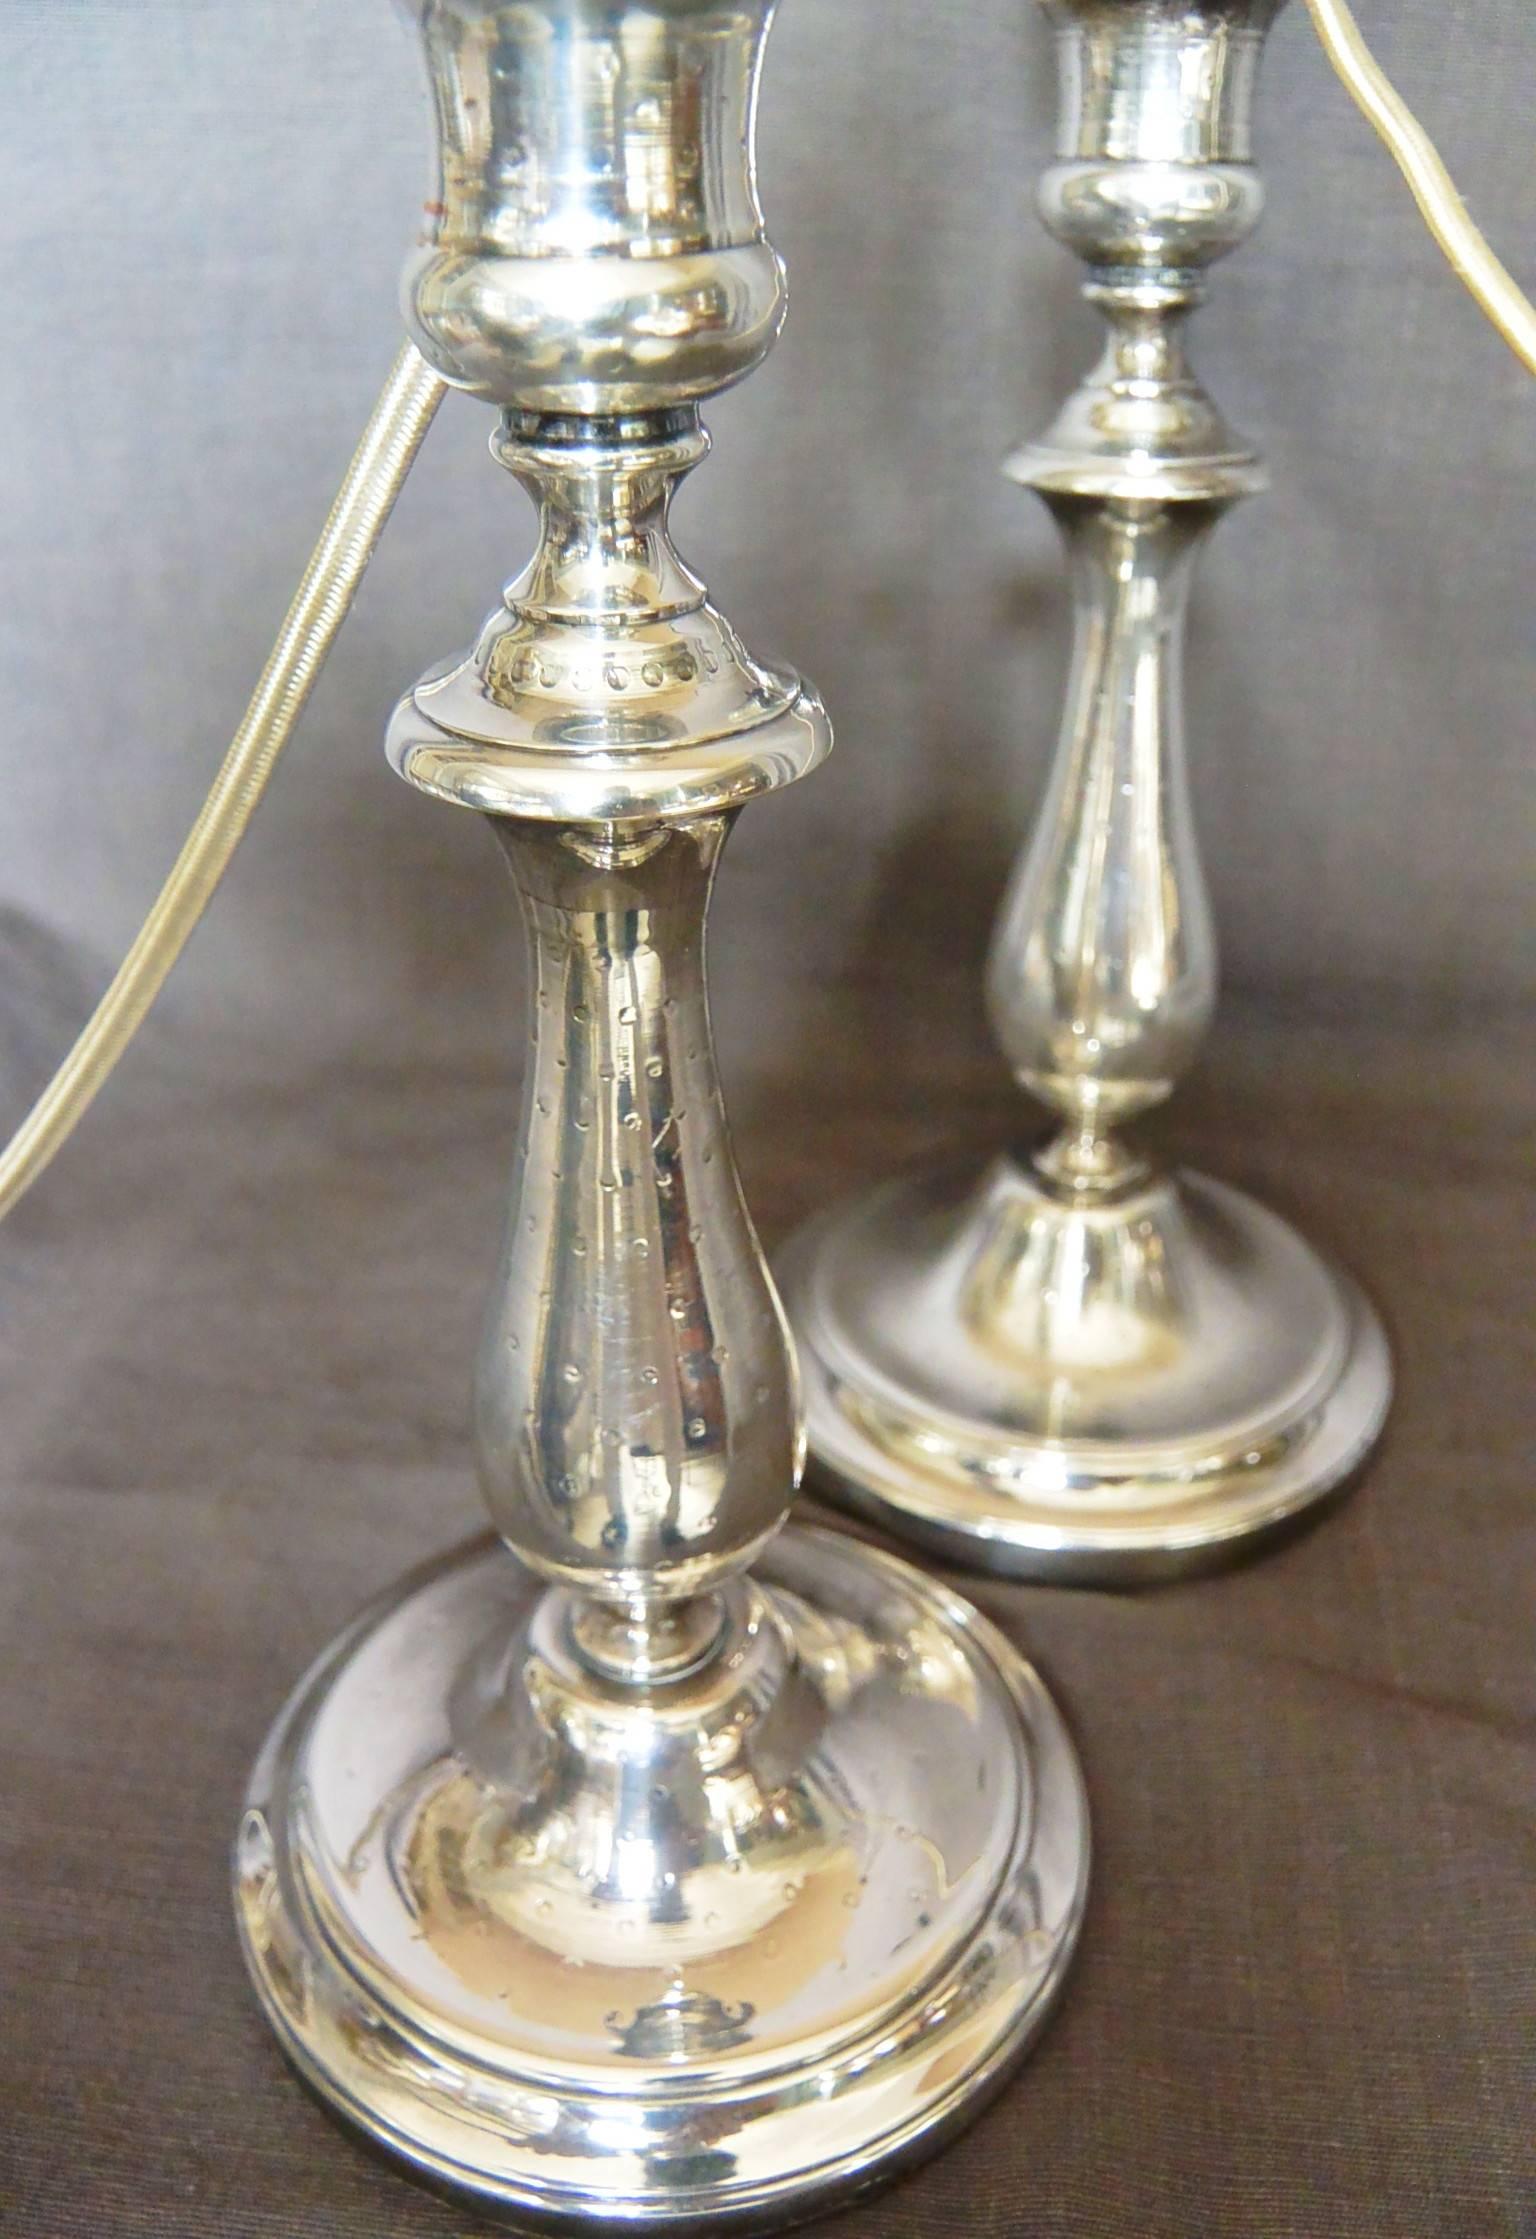 Pair Christofle silver candlestick lamps. Vintage Christofle boudoir/dressing table or dining table lamps in a subtle dot or strawberry seed pattern. Newly electrified with silver silk cord and switches. With hallmarks for Christofle. France, late